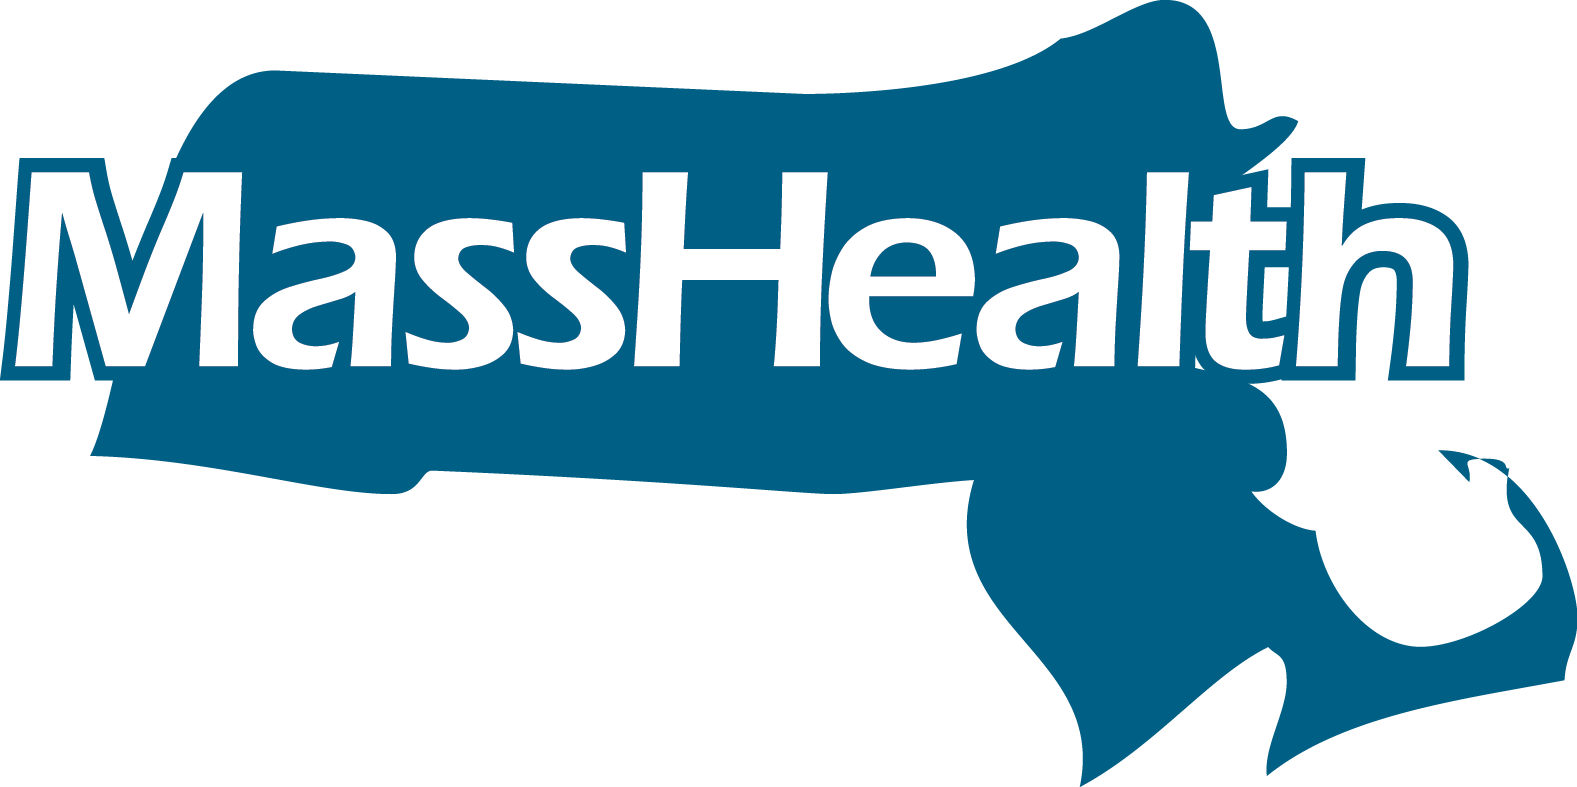  $193 Million in Illegal Payments  by MassHealth